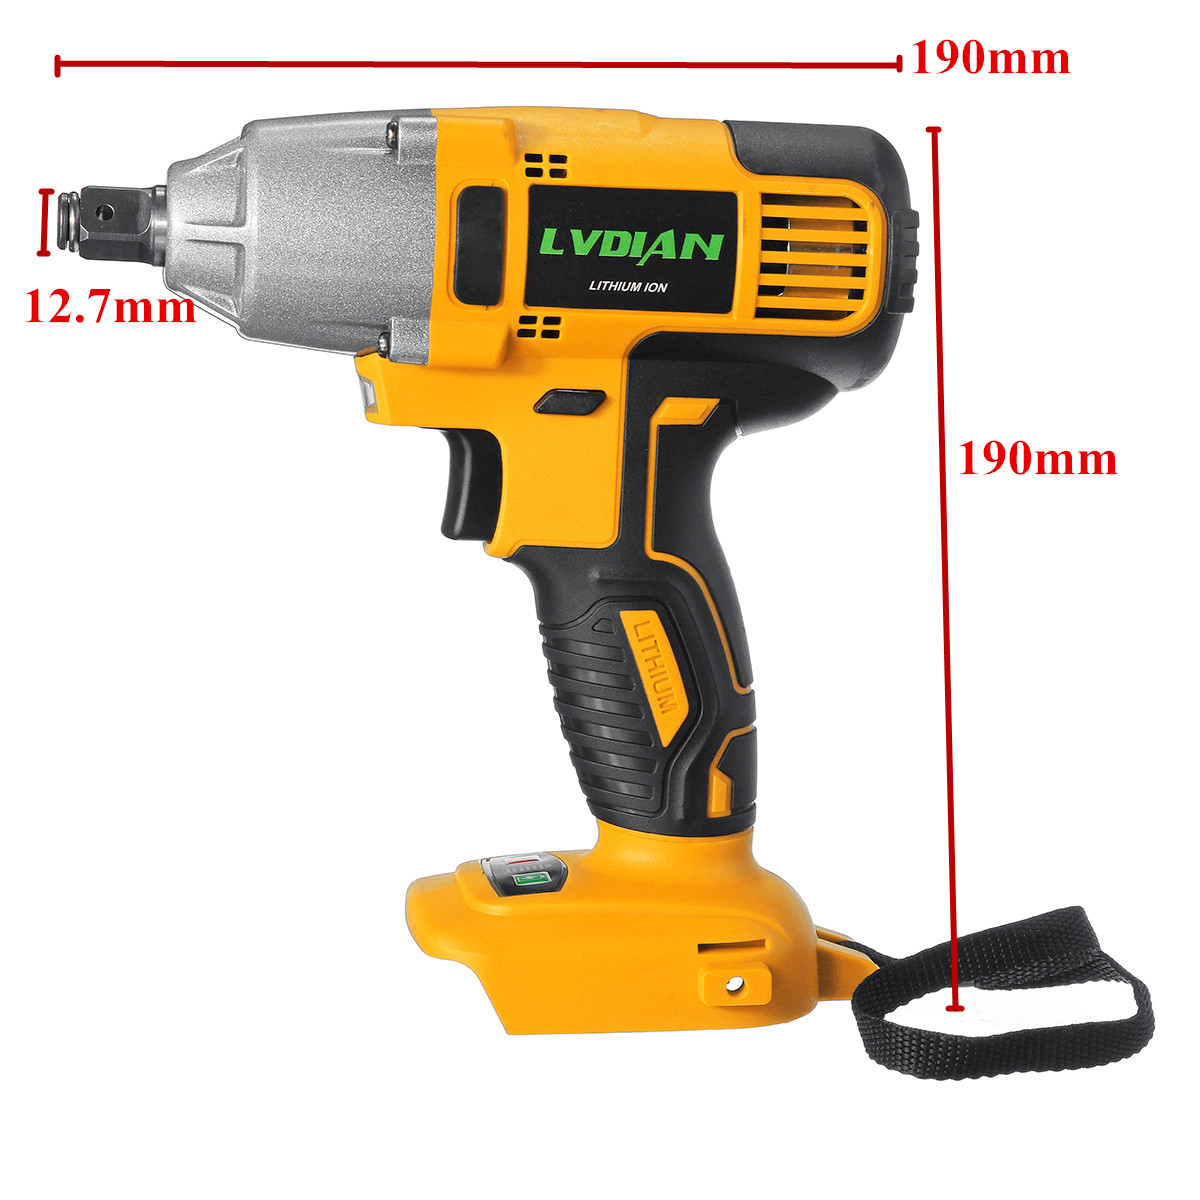 18V-320NM-Cordless-Electric-Wrench-Driver-Stepless-Speed-Change-Switch-for-Makita-Battery-Electric-W-1602070-4